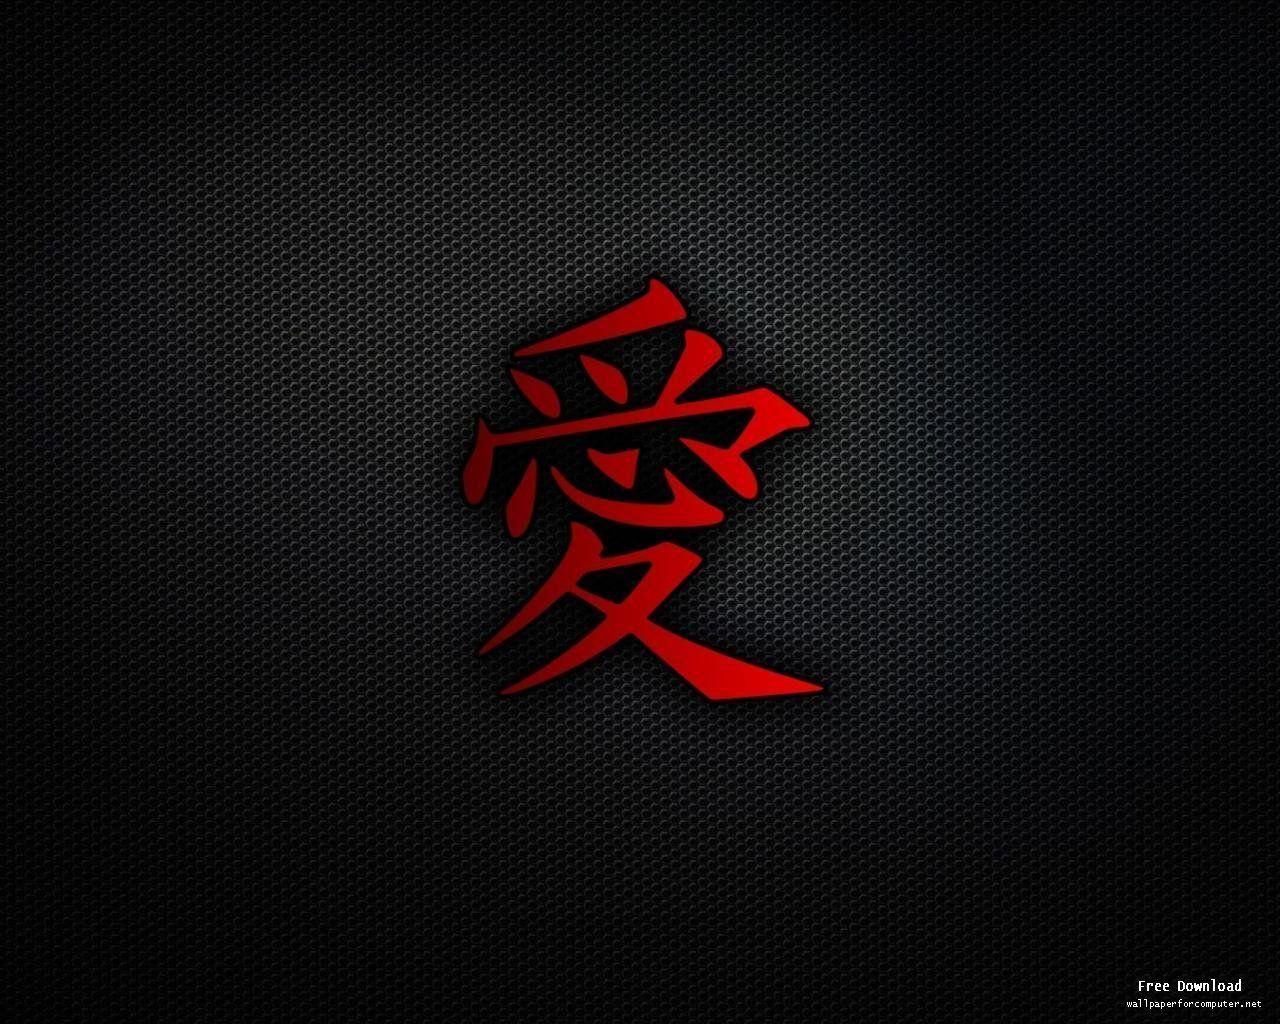 Cool Chinese Letter Wallpaper .wallpaperaccess.com